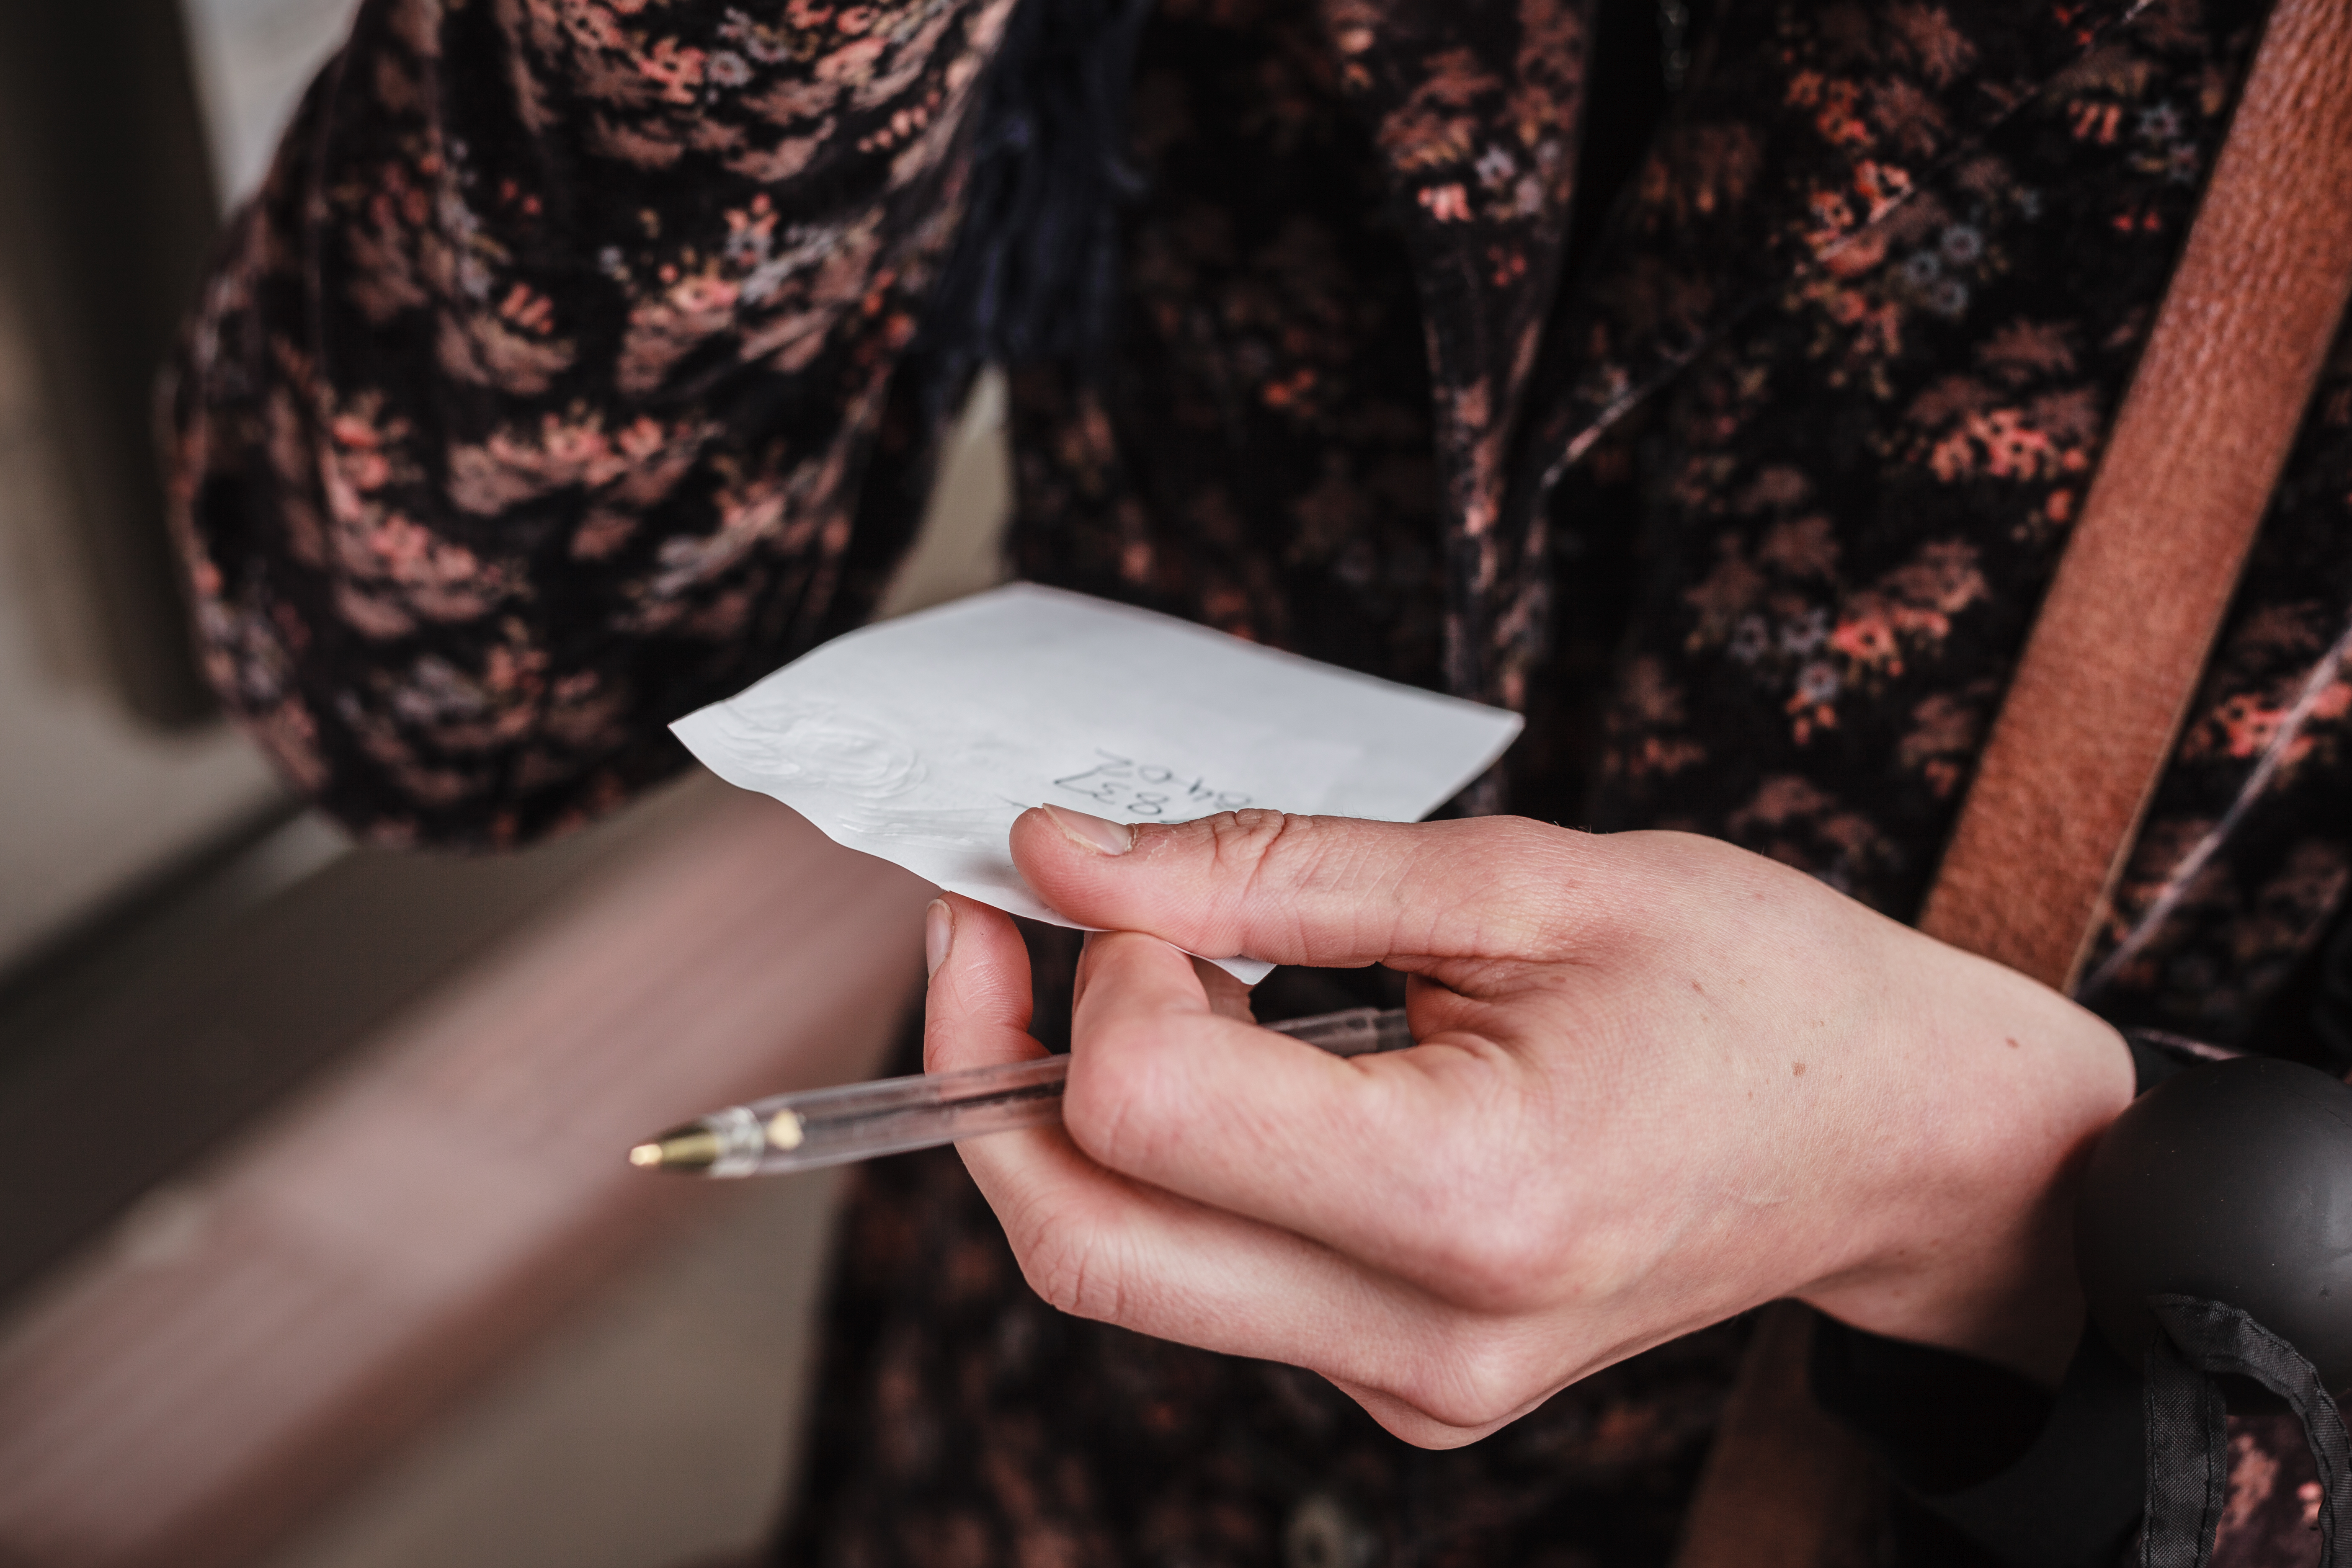 A woman holding a piece of paper | Source: Shutterstock